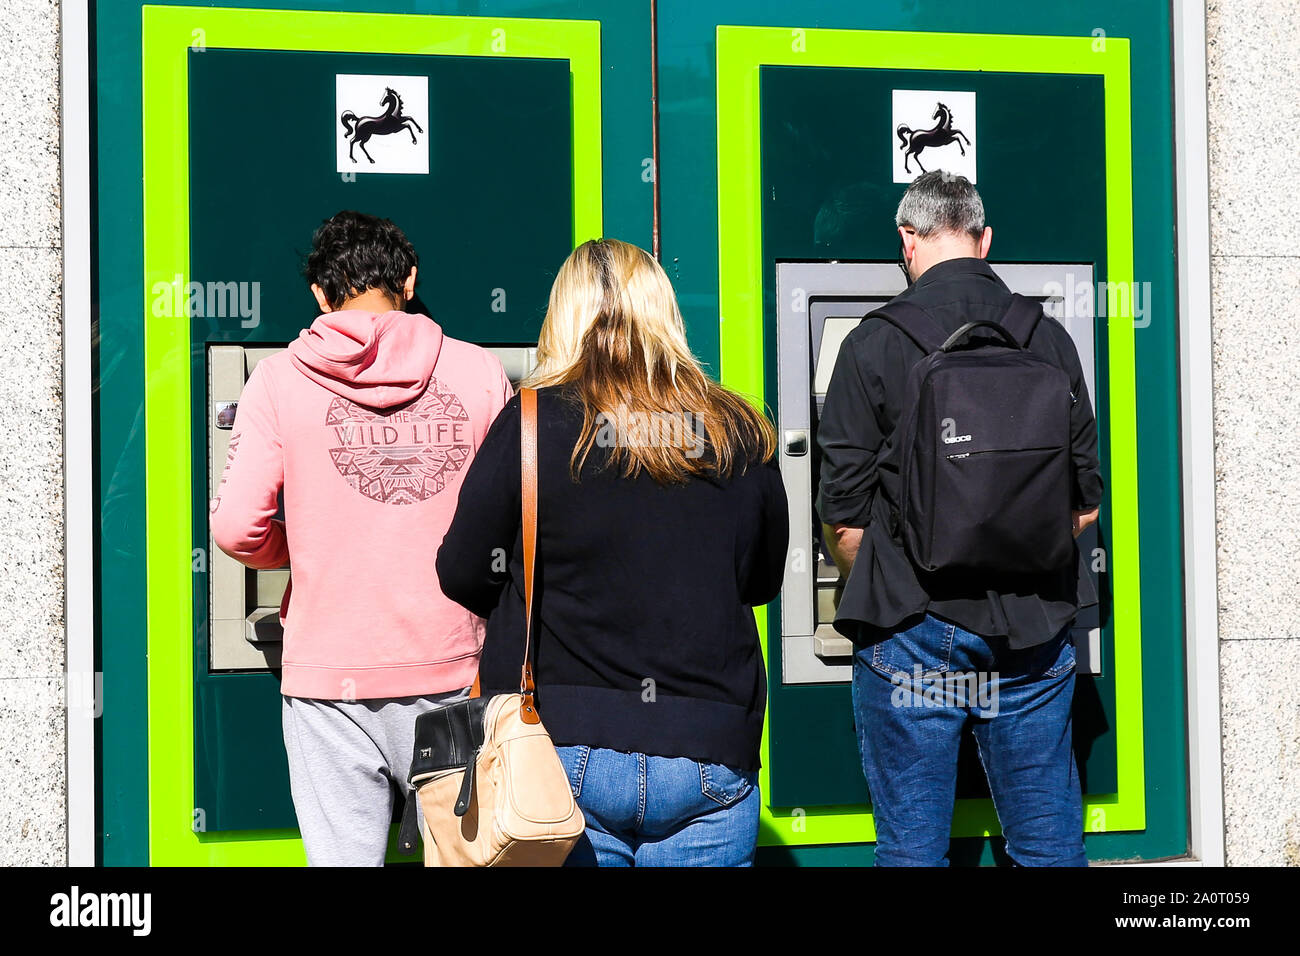 September 21, 2019, London, United Kingdom: People are seen using Lloyds Bank's ATM machine in central London. Lloyds Bank plc is a British retail and commercial bank with branches across England and Wales. (Credit Image: © Dinendra Haria/SOPA Images via ZUMA Wire) Stock Photo